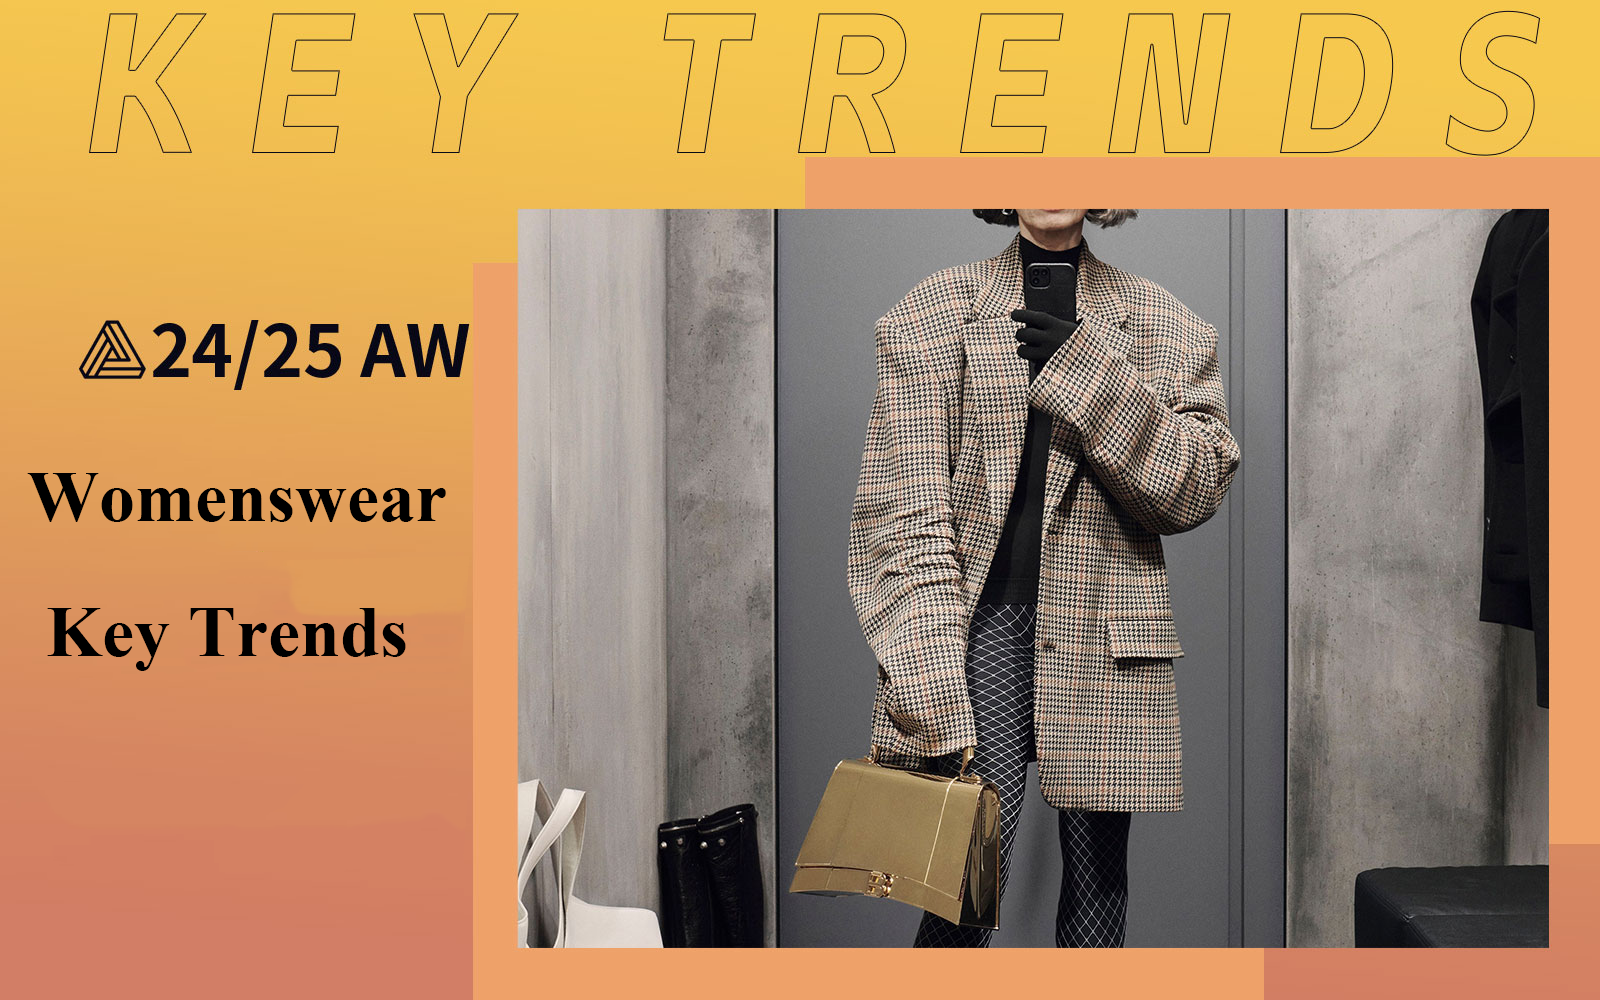 A/W 24/25 Women's Outfit Key Trends